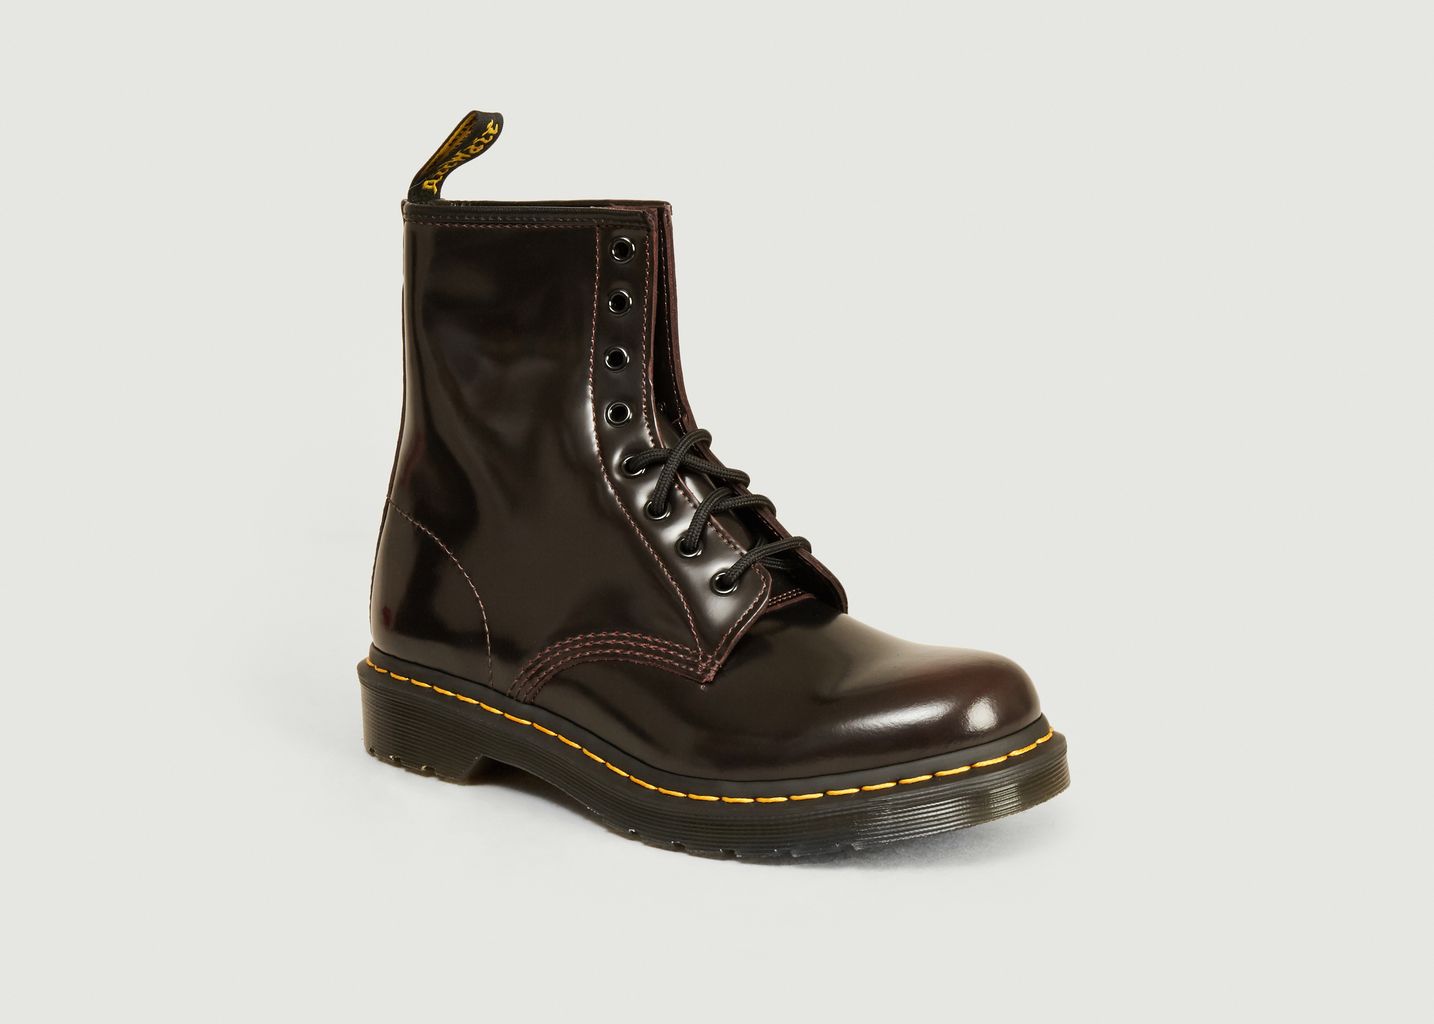 1460 leather boots - Dr. Martens